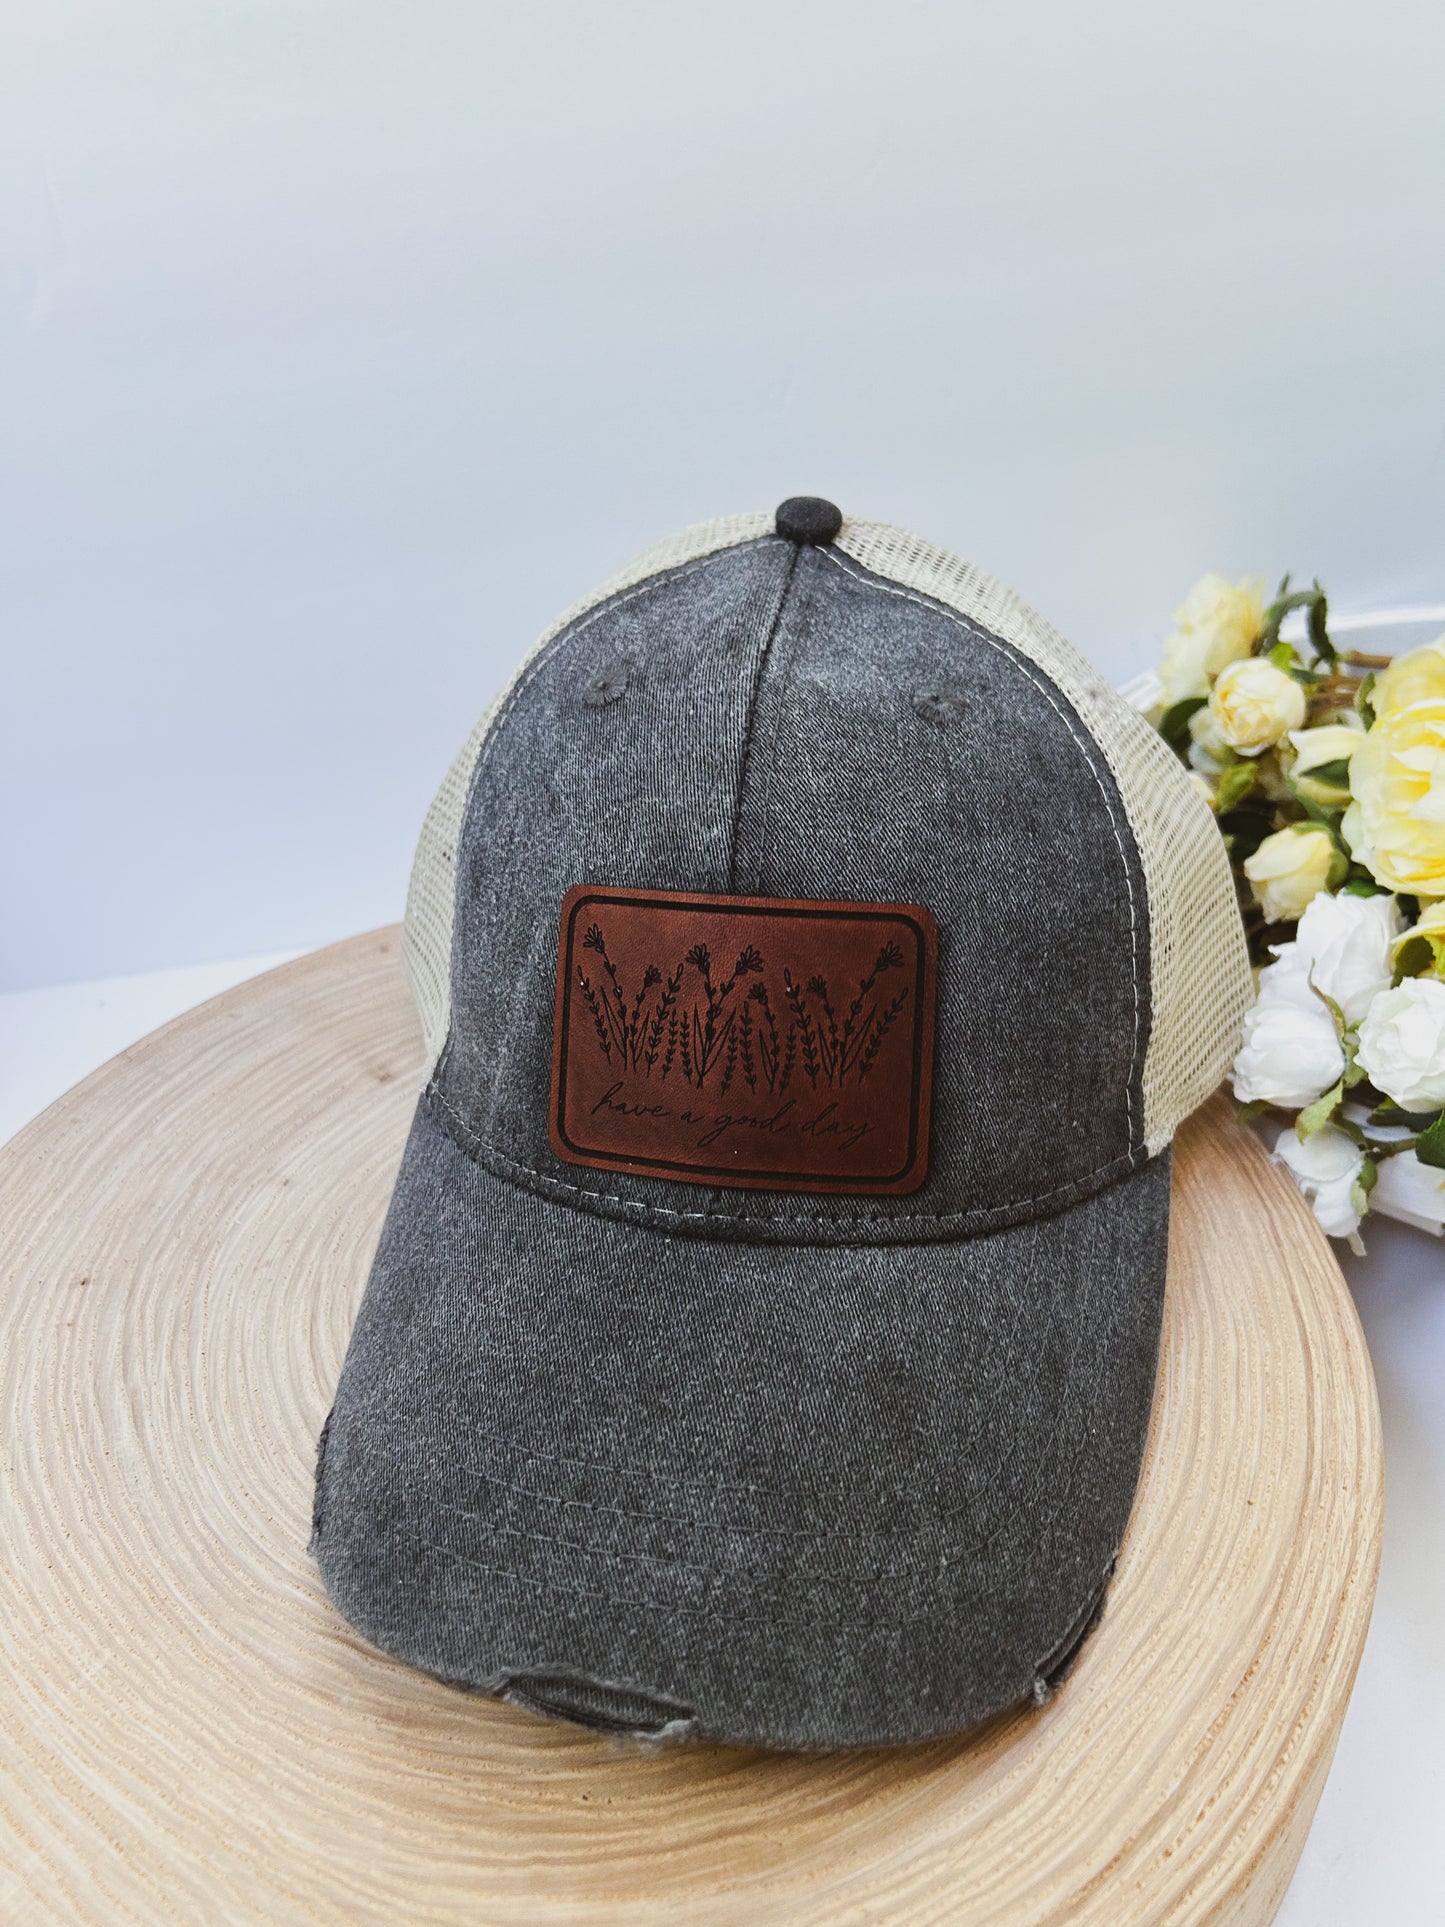 Have A Good Day Wildflower Leather Patch on Distressed Charcoal Black Hat